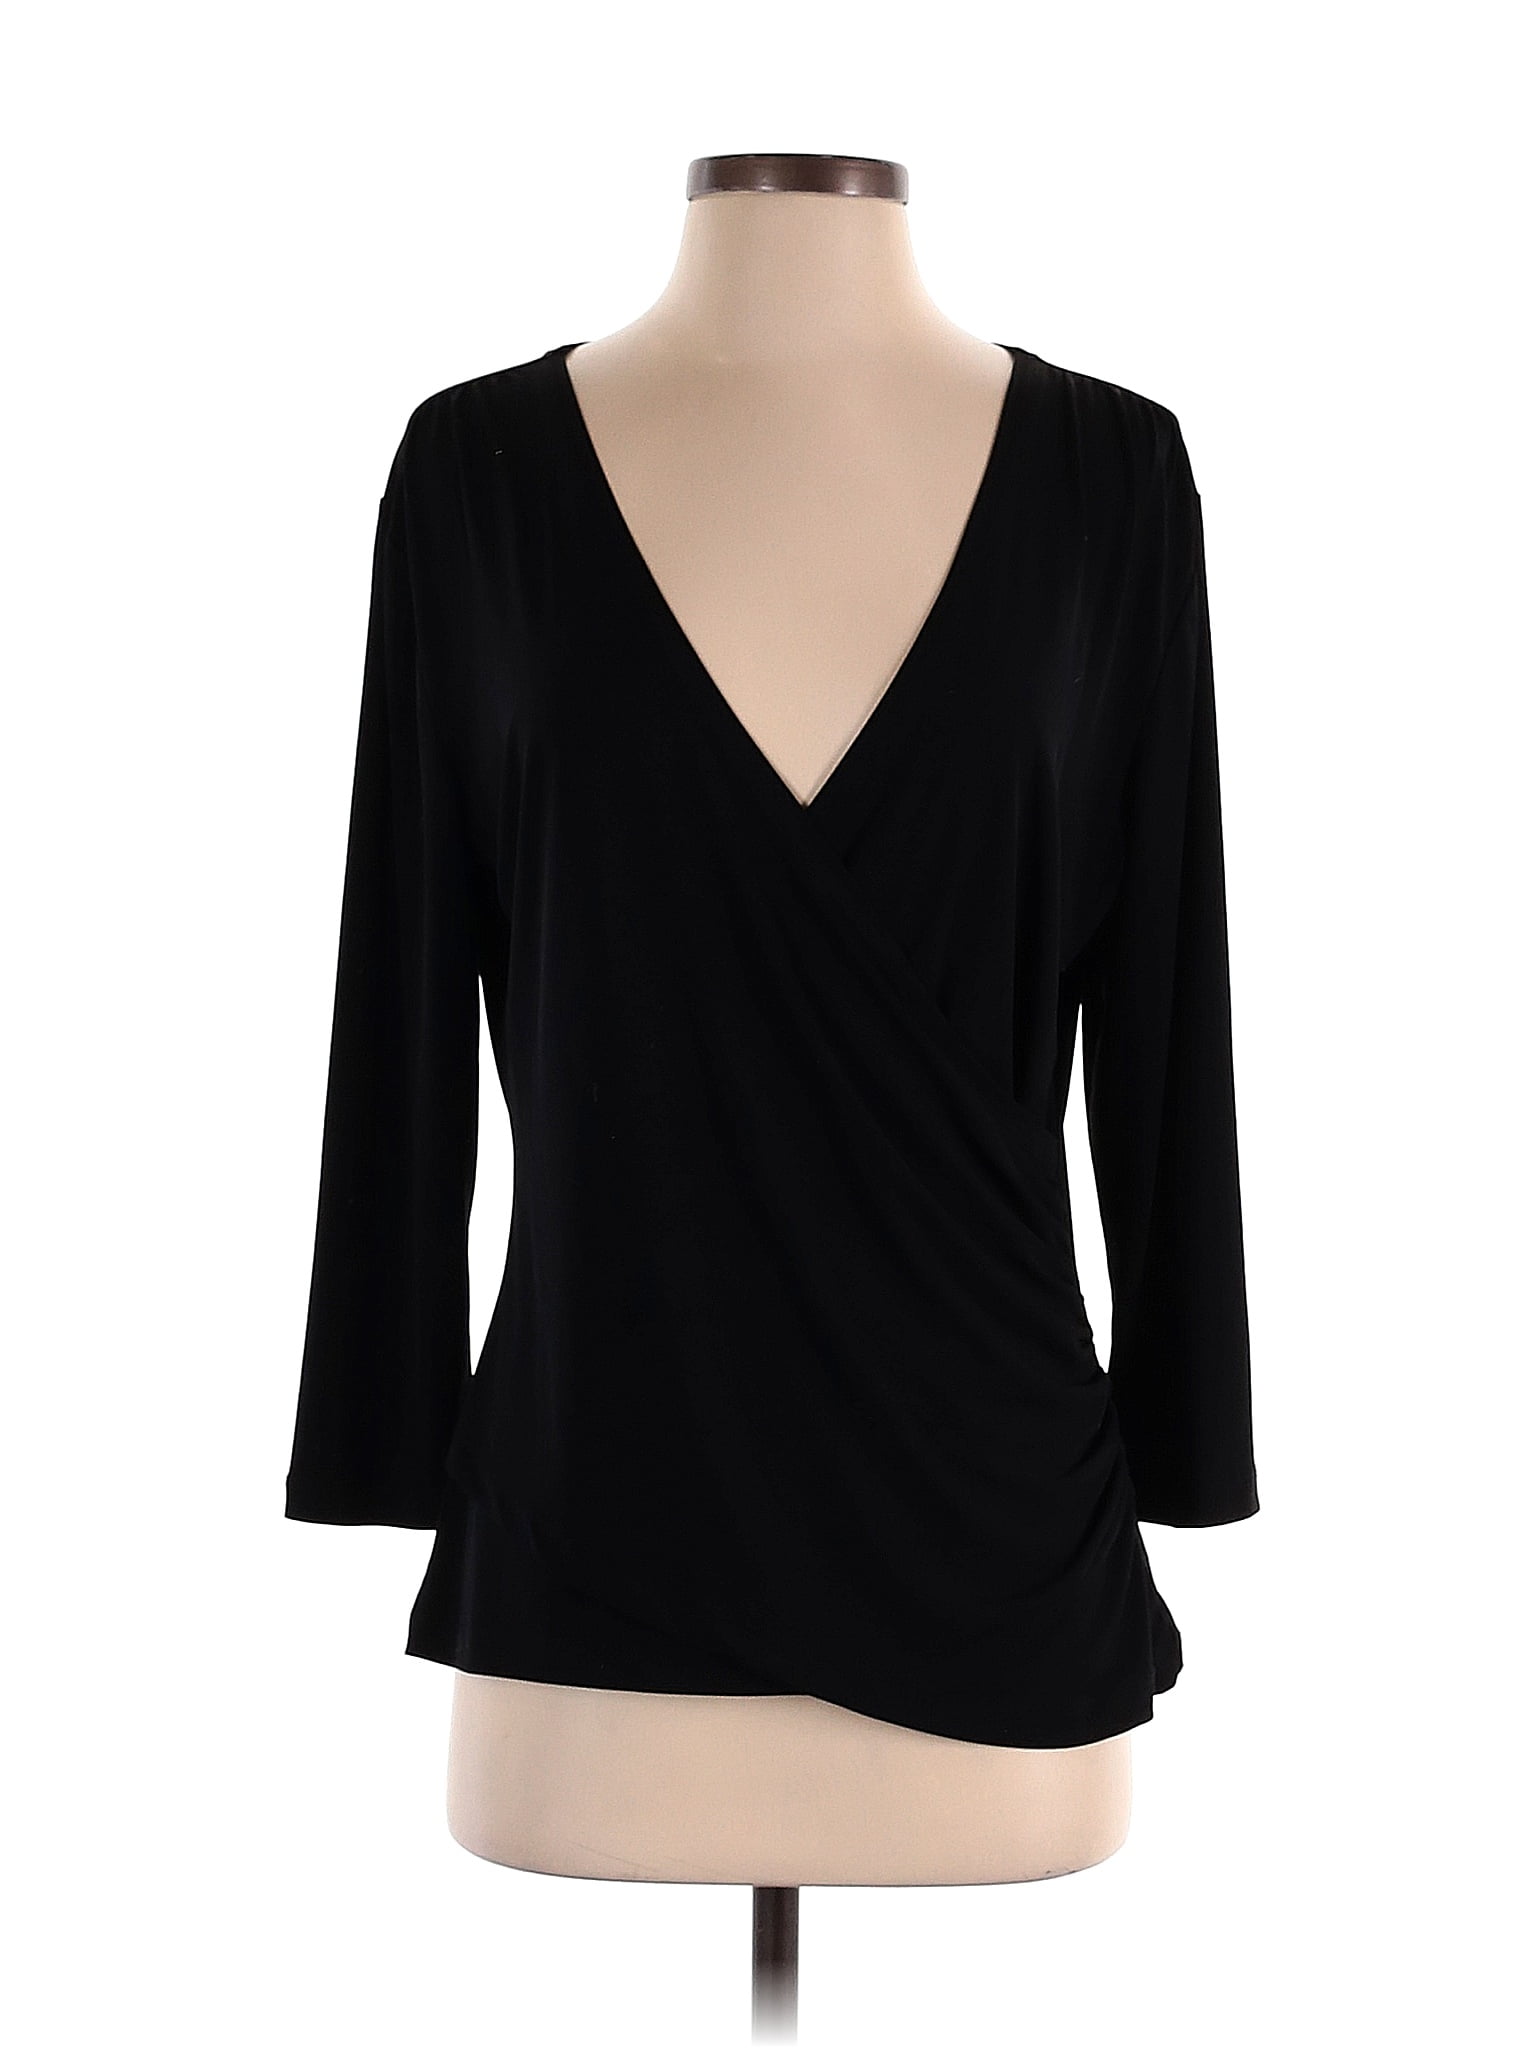 Coldwater Creek Solid Black Long Sleeve Top Size S - 75% off | ThredUp